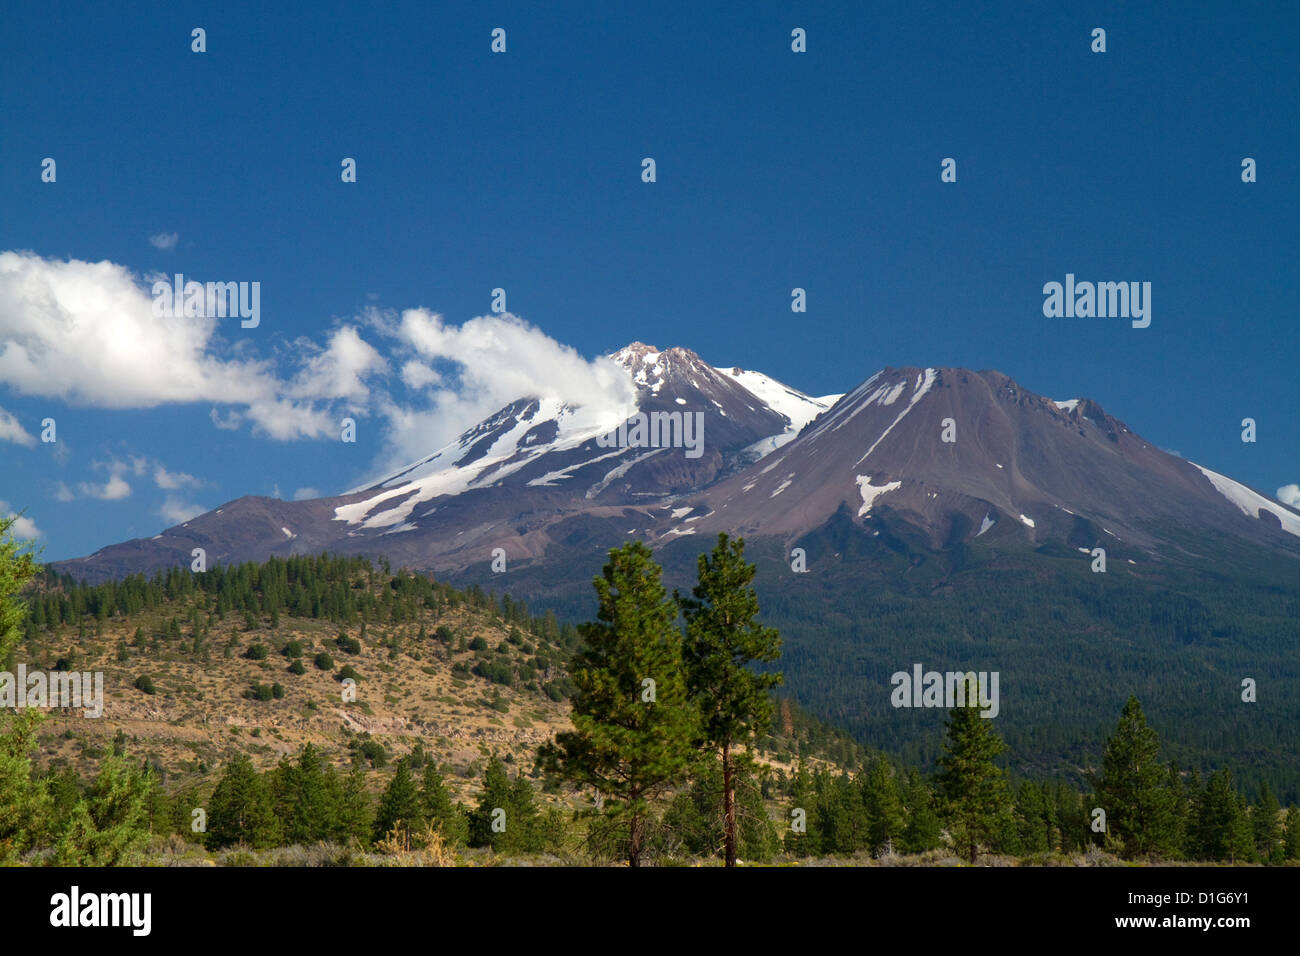 Mount Shasta north facing side located in Siskiyou County, California, USA. Stock Photo